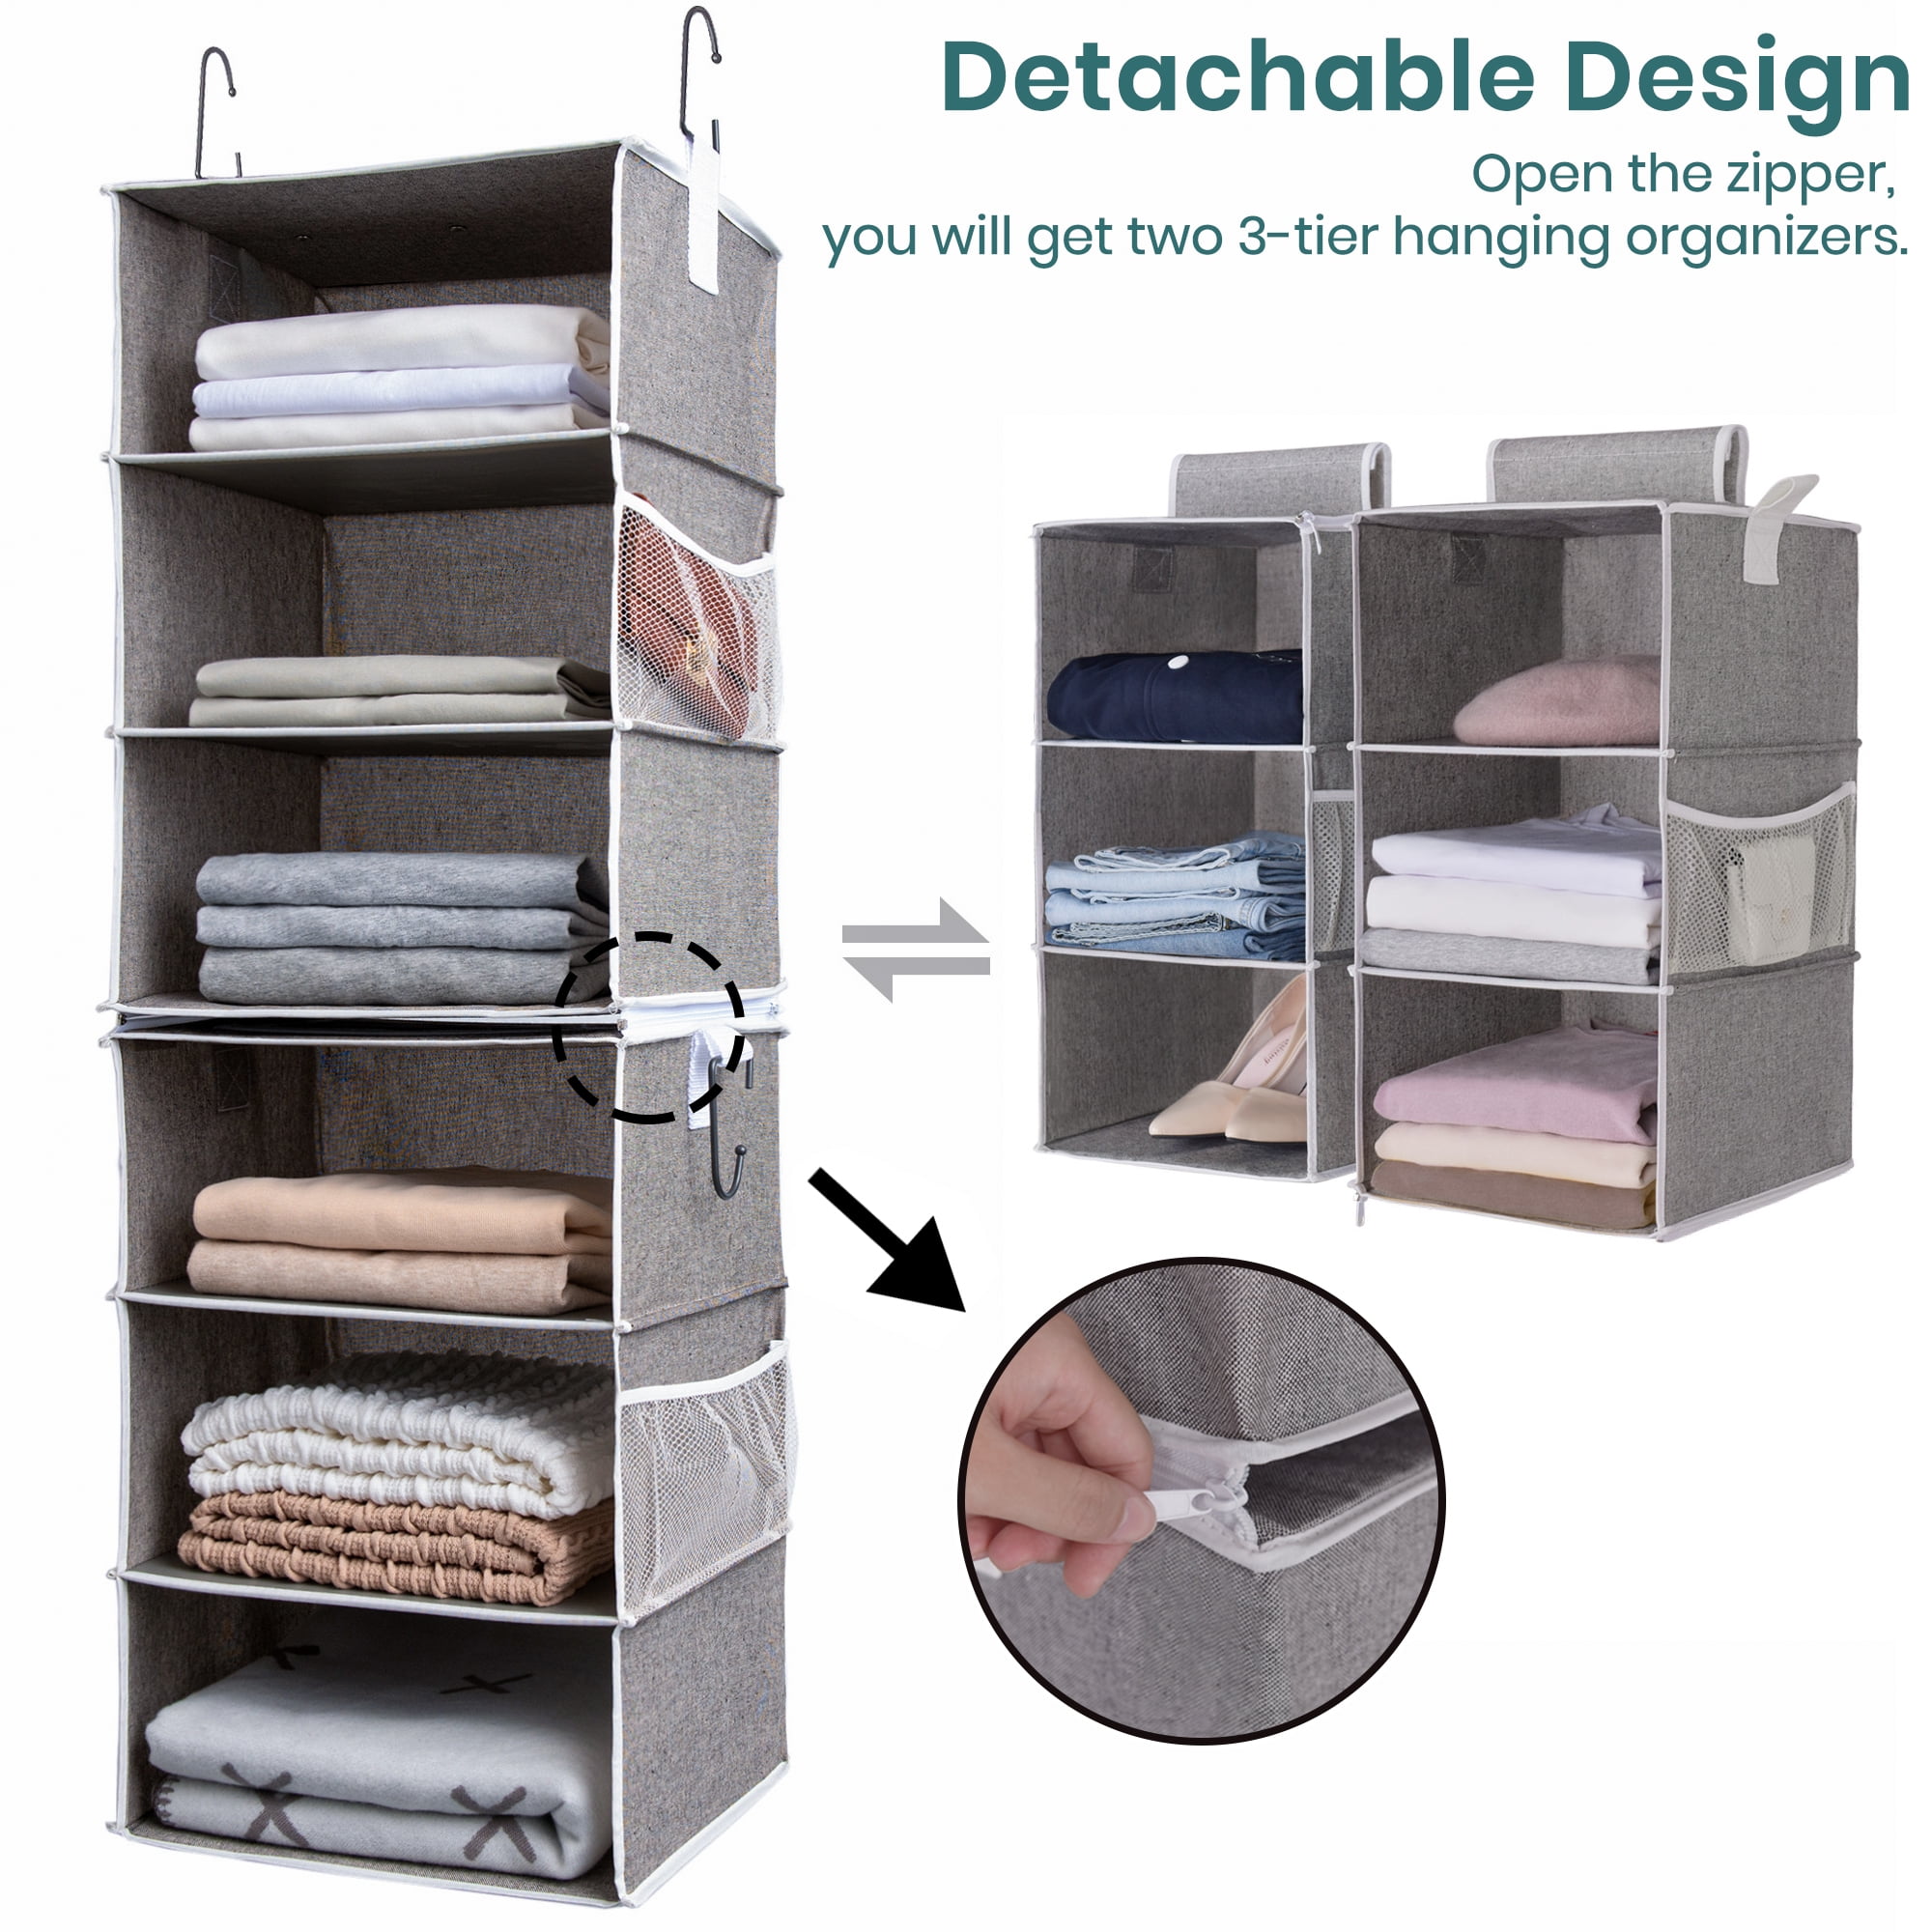  KEETDY 2-Shelf Small Hanging Closet Organizers and Storage with  2 Large Shoe Pockets Hanging Shelves Organizer for Clothes Camper Closet,  RV, Bedroom, Dorm, Grey : Home & Kitchen